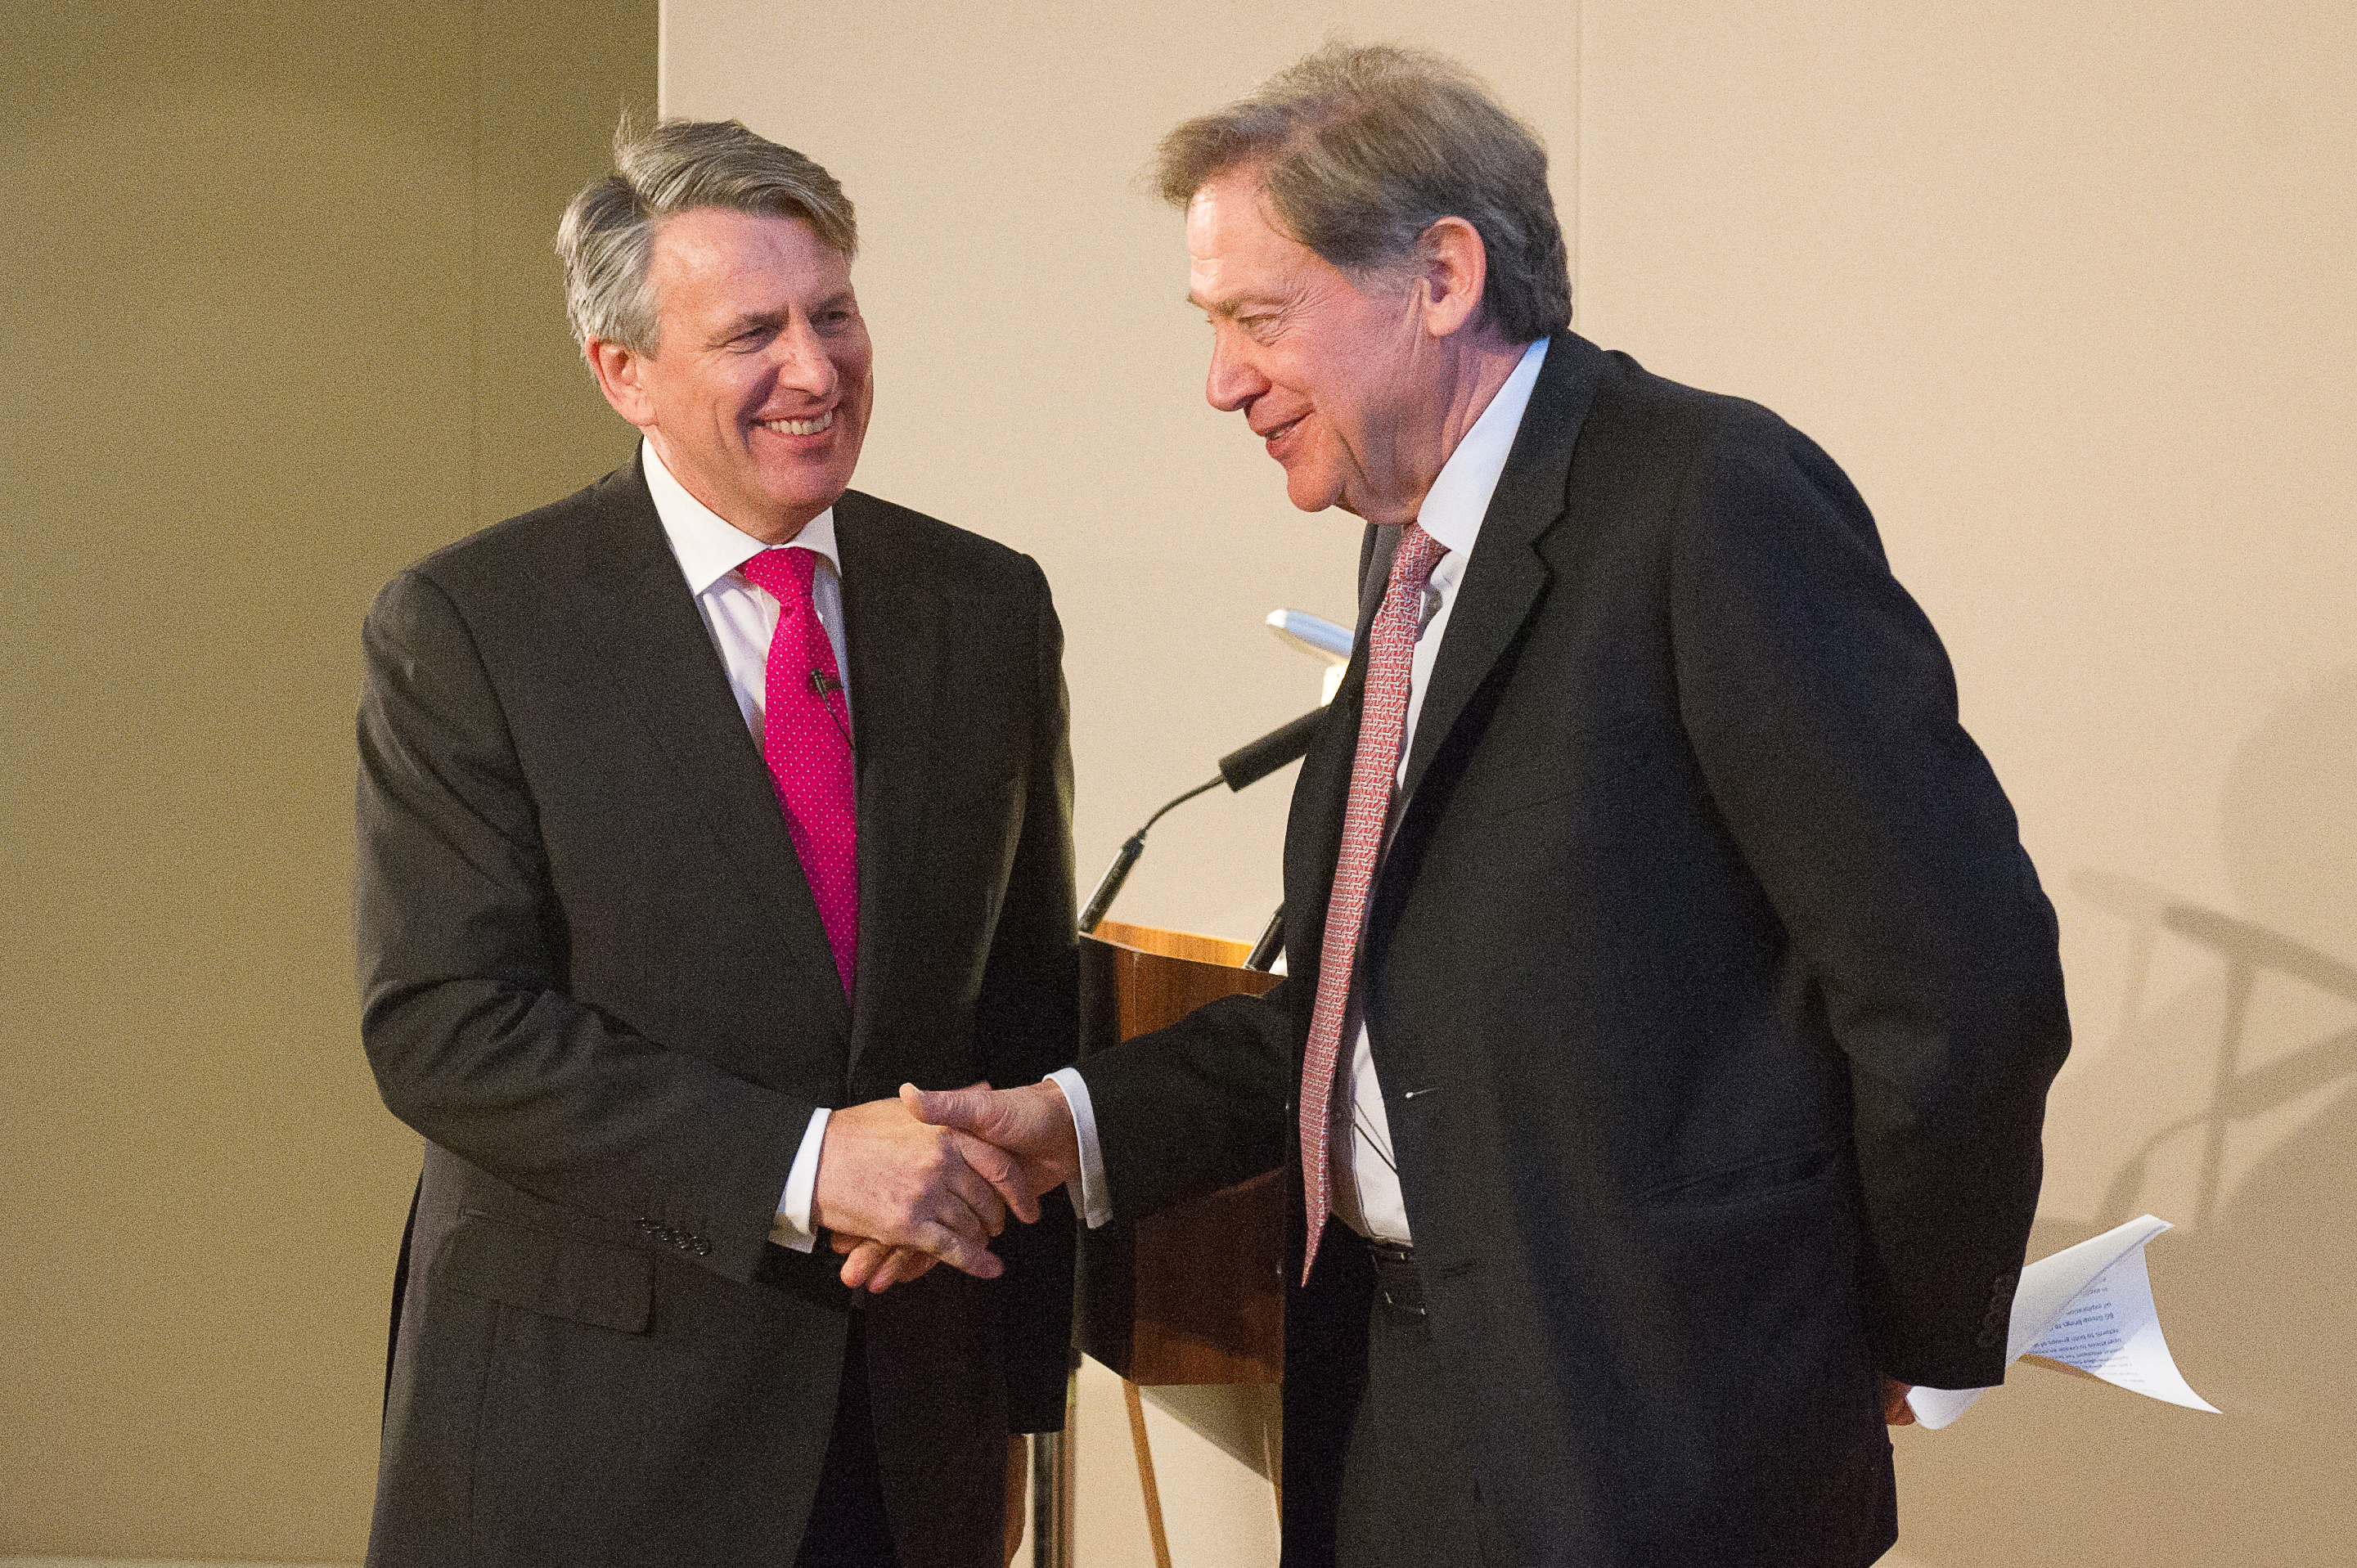 Ben van Beurden, chief executive of Royal Dutch Shell and Andrew Gould, chairman of BG Group